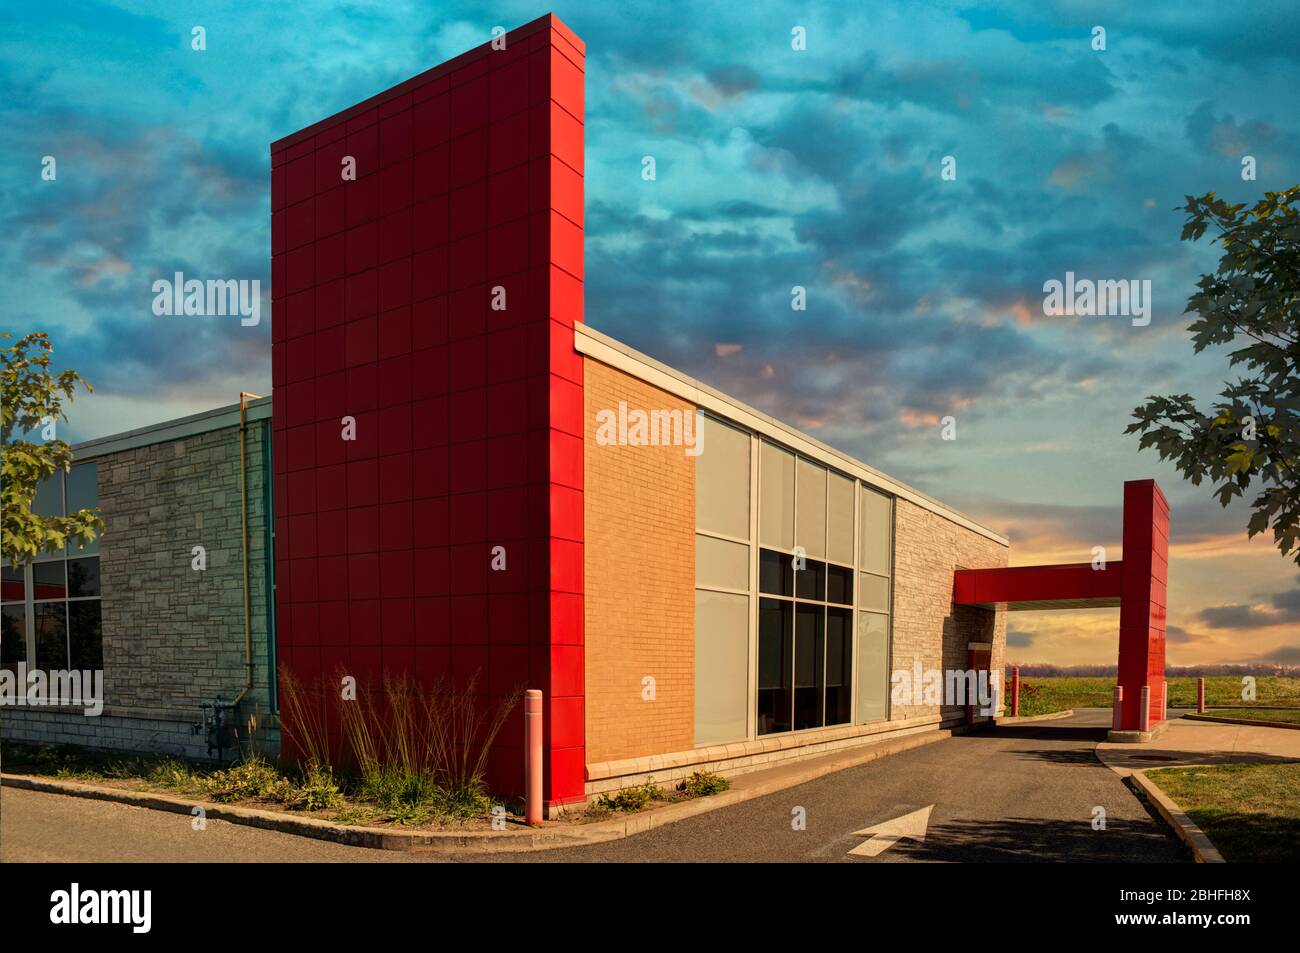 Bank drive thru on a summer day, cloudy sky in background. Stock Photo